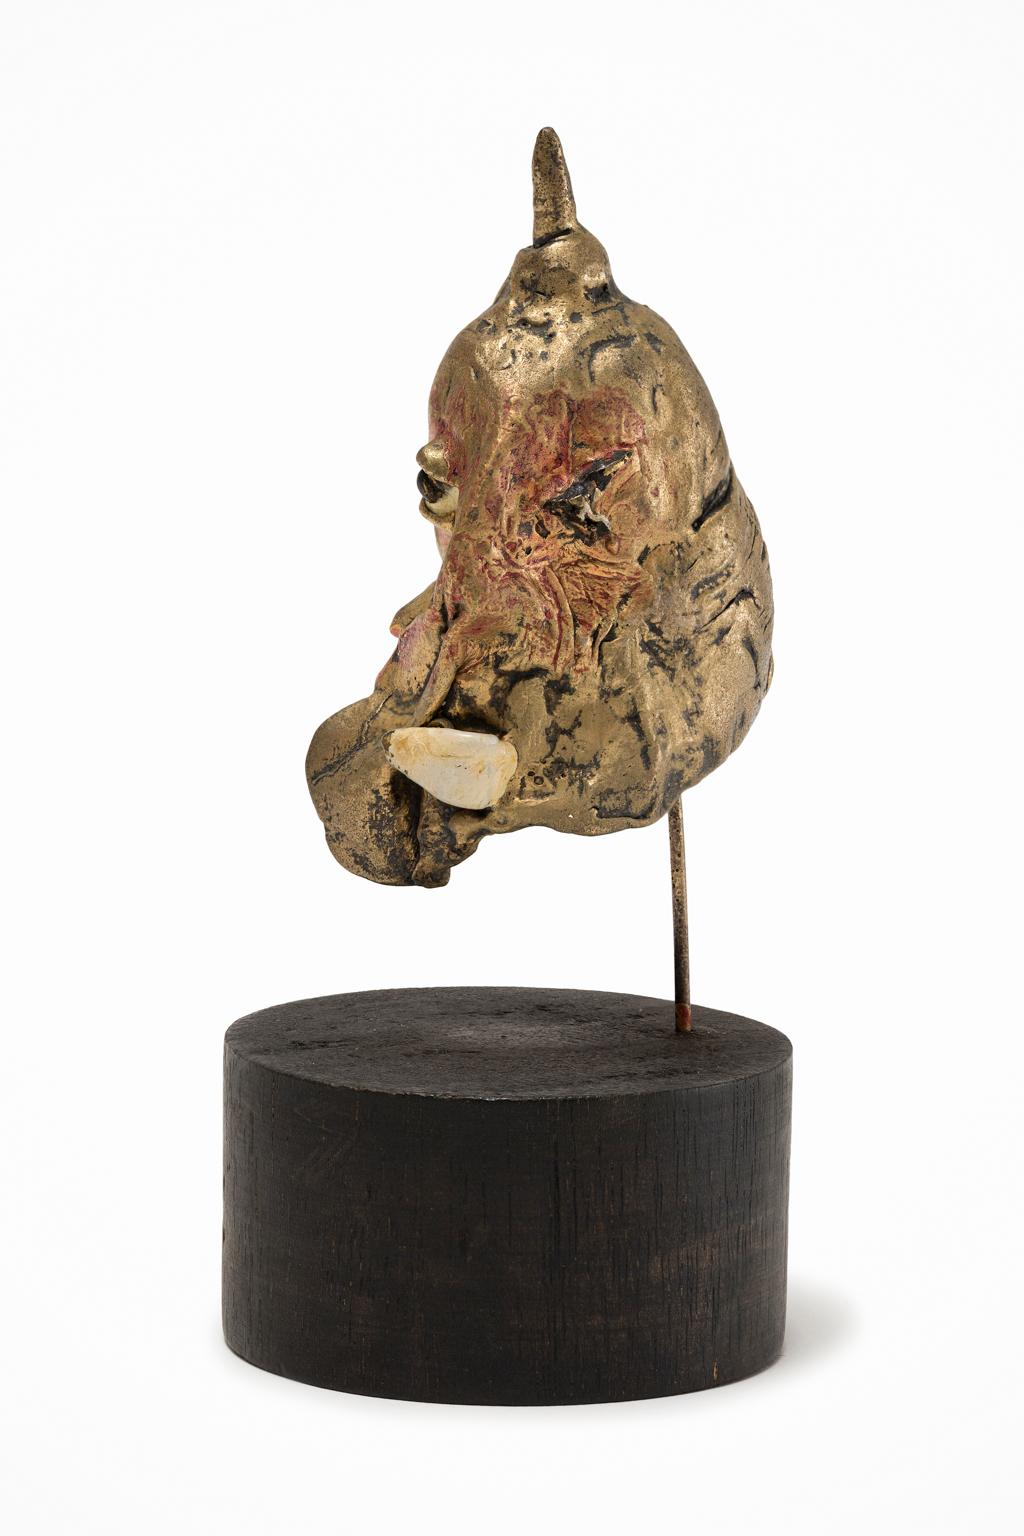 This small metal statuette exemplifies the Italian artist Umberto Del Negro's interest in playing with the themes of civilization and nature. From multiple angles this piece could appear to be an old world military helmet or one of the stranger